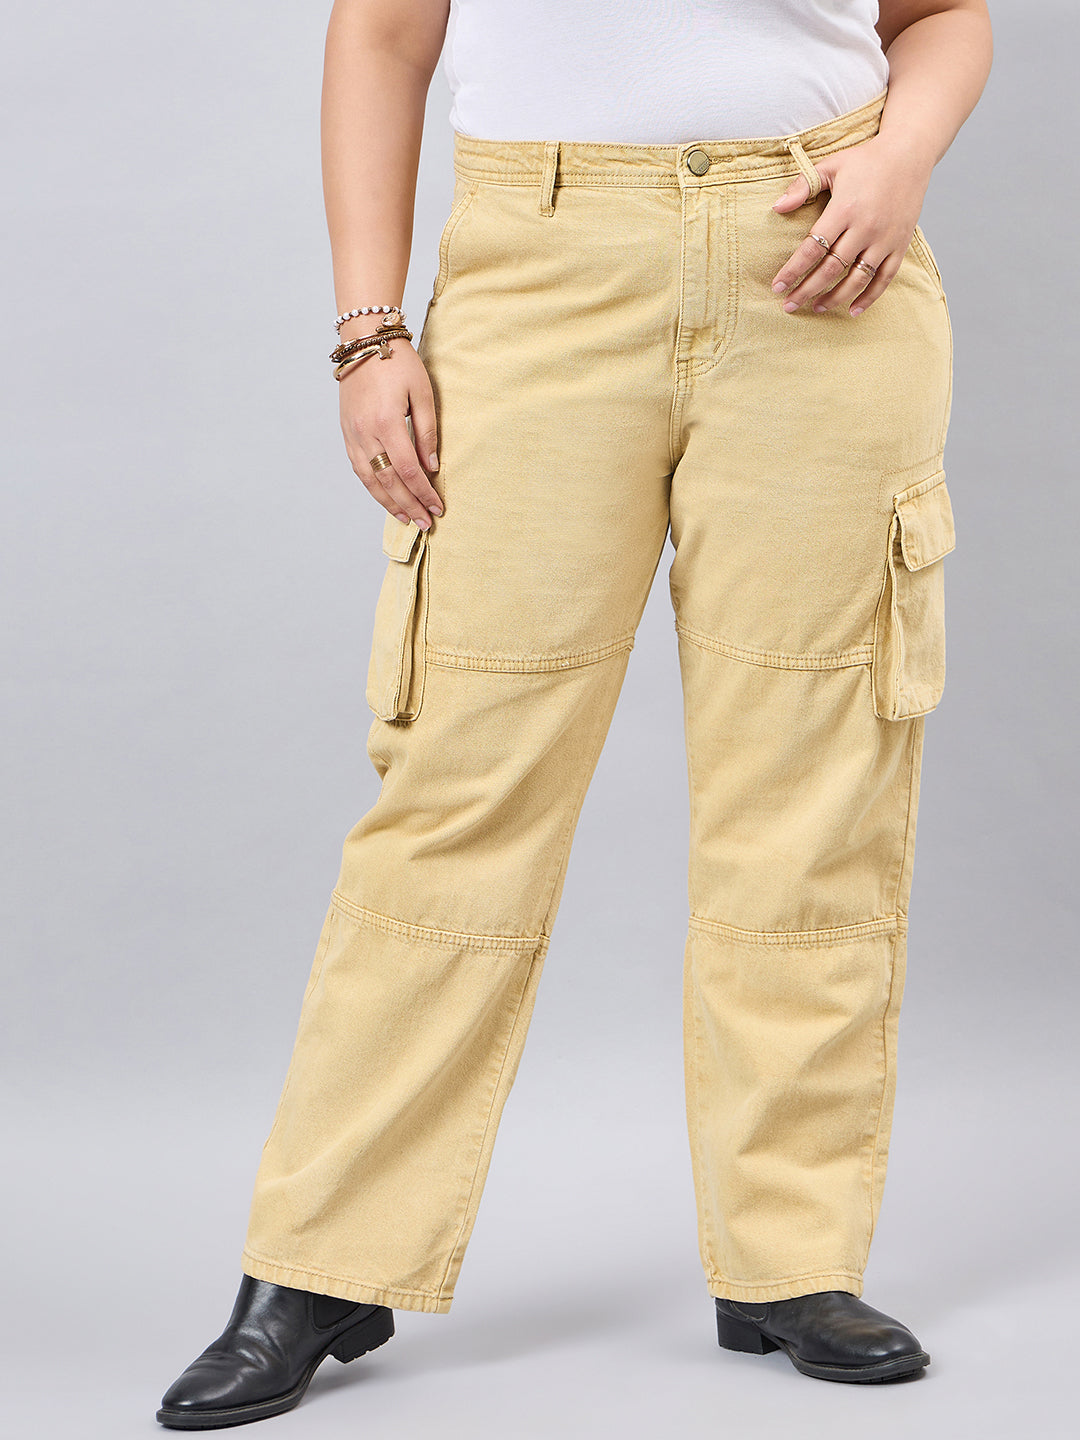 Women's Plus Size How To Style: Cargo Pants